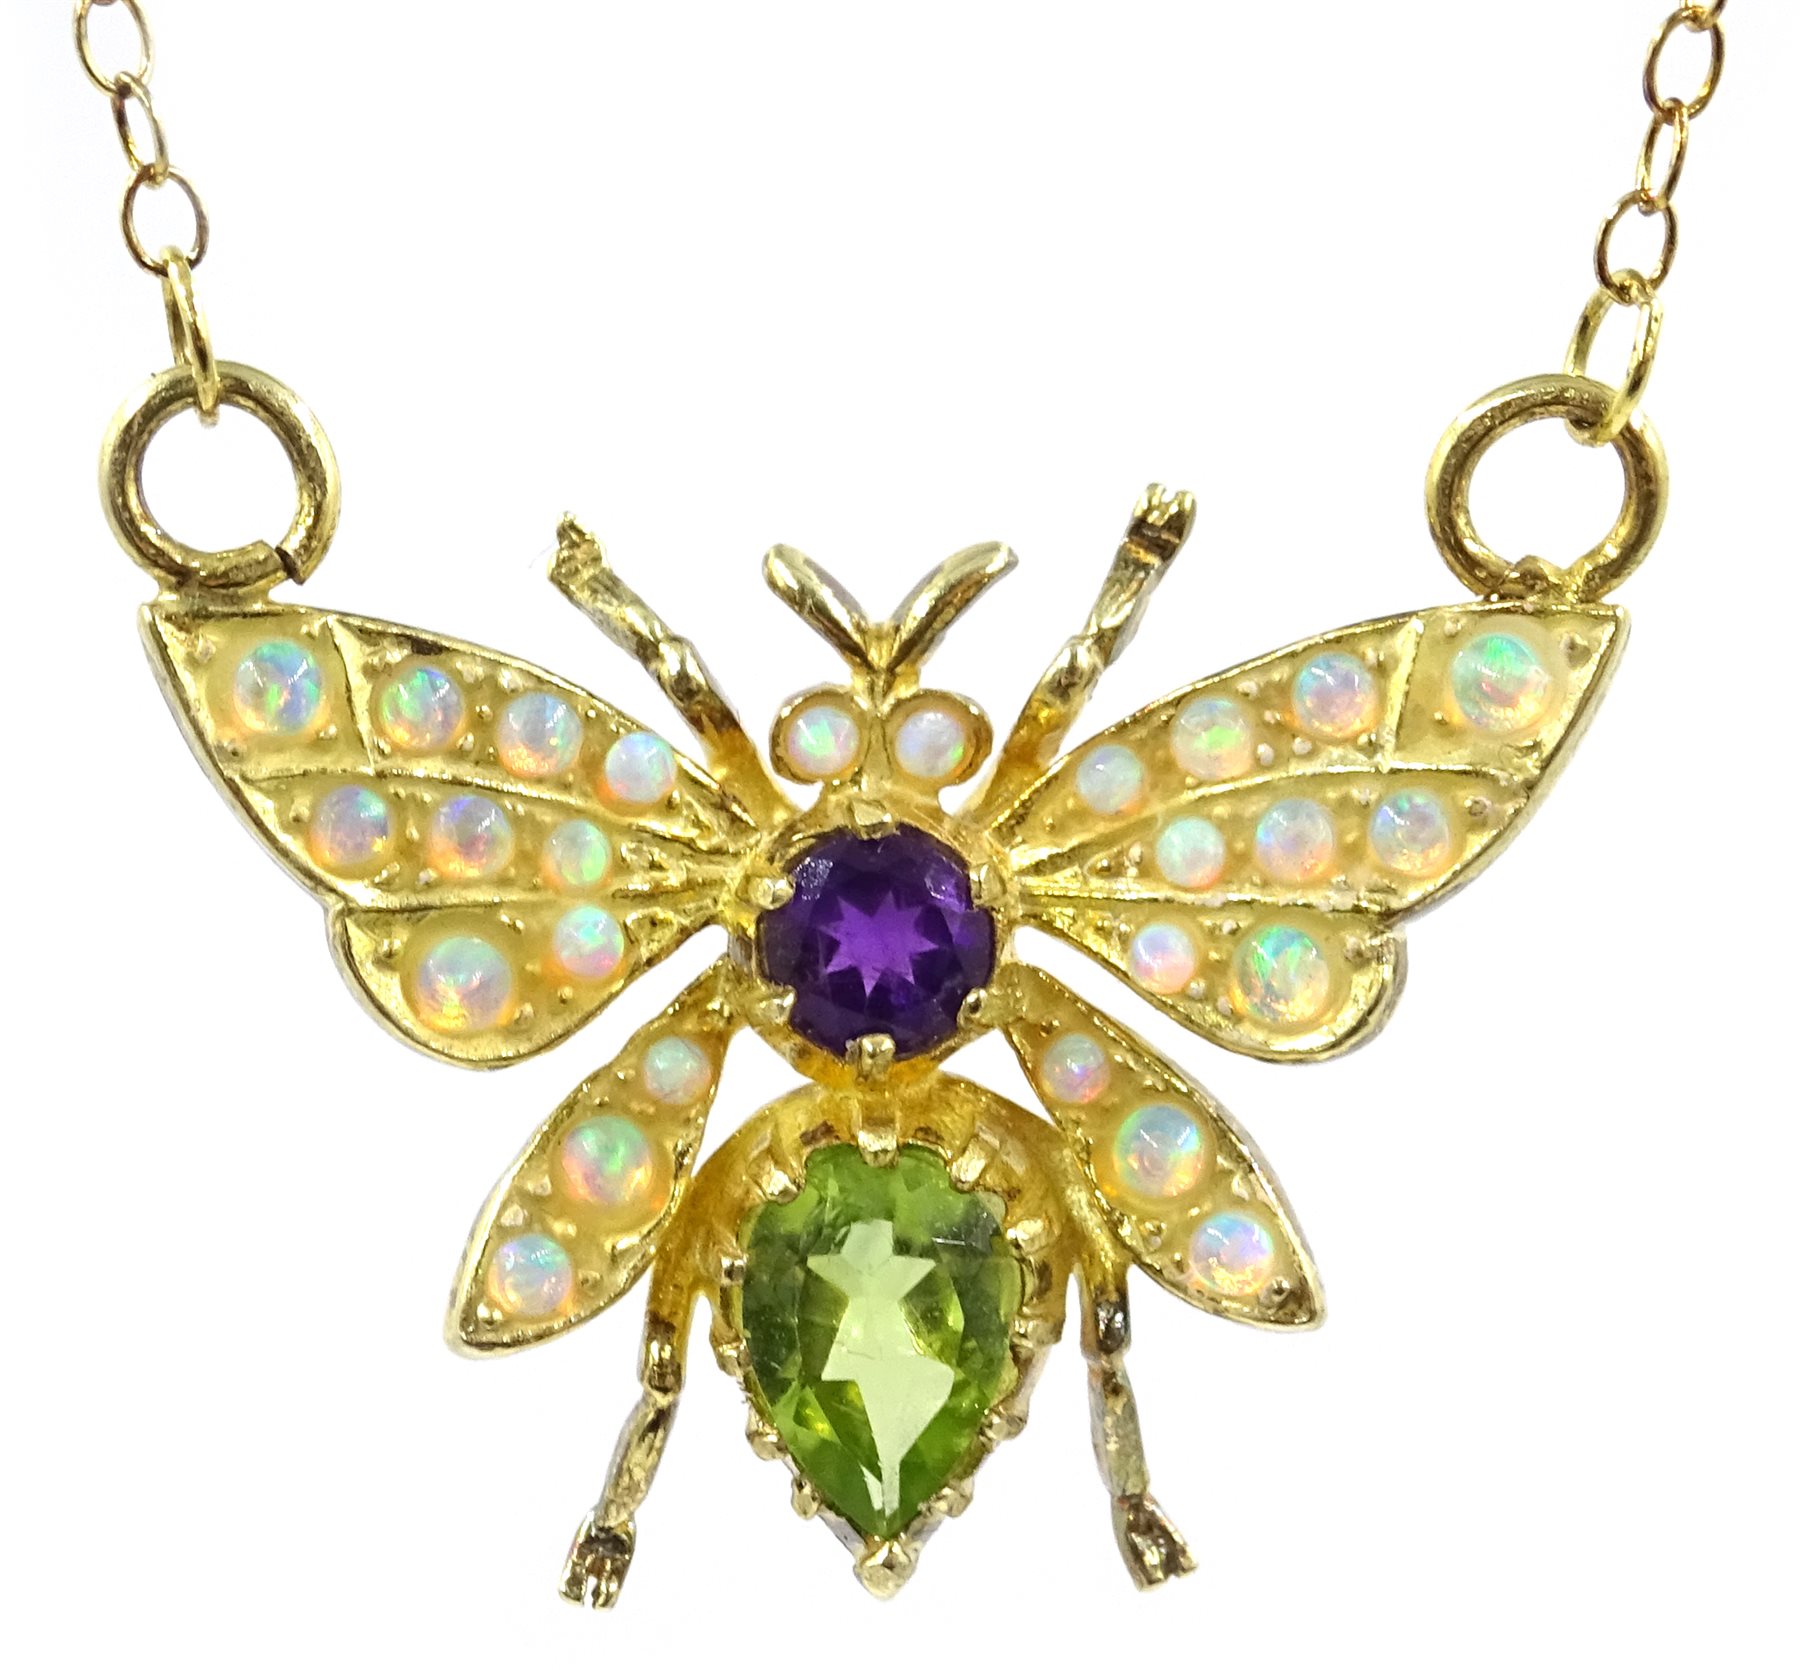 10K YELLOW GOLD PRISM BUTTERFLY NECKLACE | Patty Q's Jewelry Inc